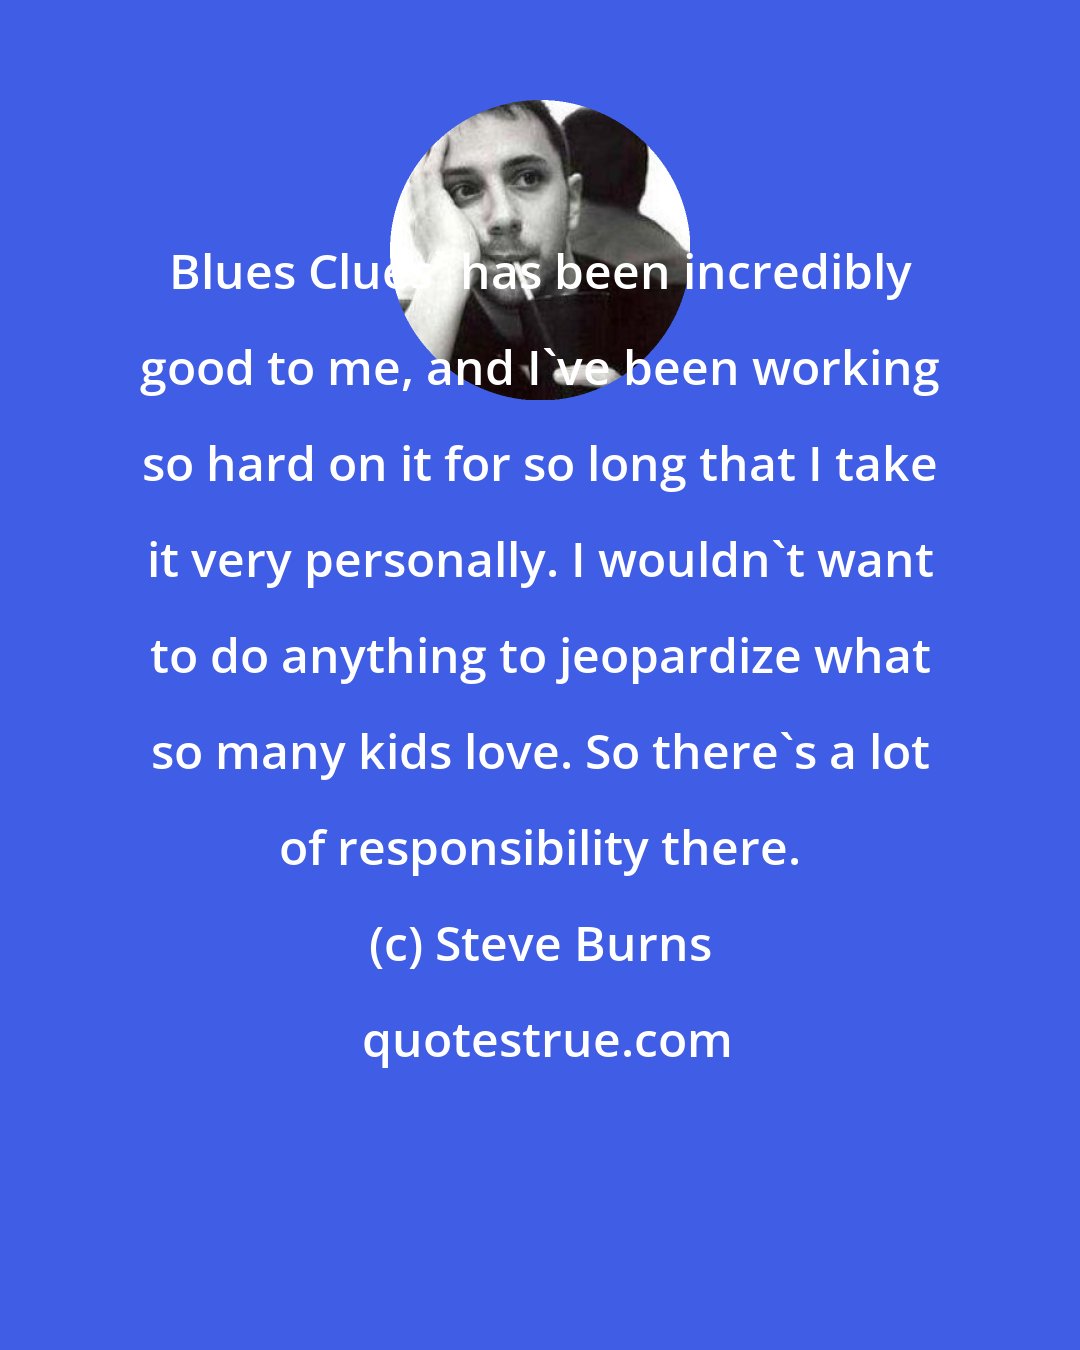 Steve Burns: Blues Clues' has been incredibly good to me, and I've been working so hard on it for so long that I take it very personally. I wouldn't want to do anything to jeopardize what so many kids love. So there's a lot of responsibility there.